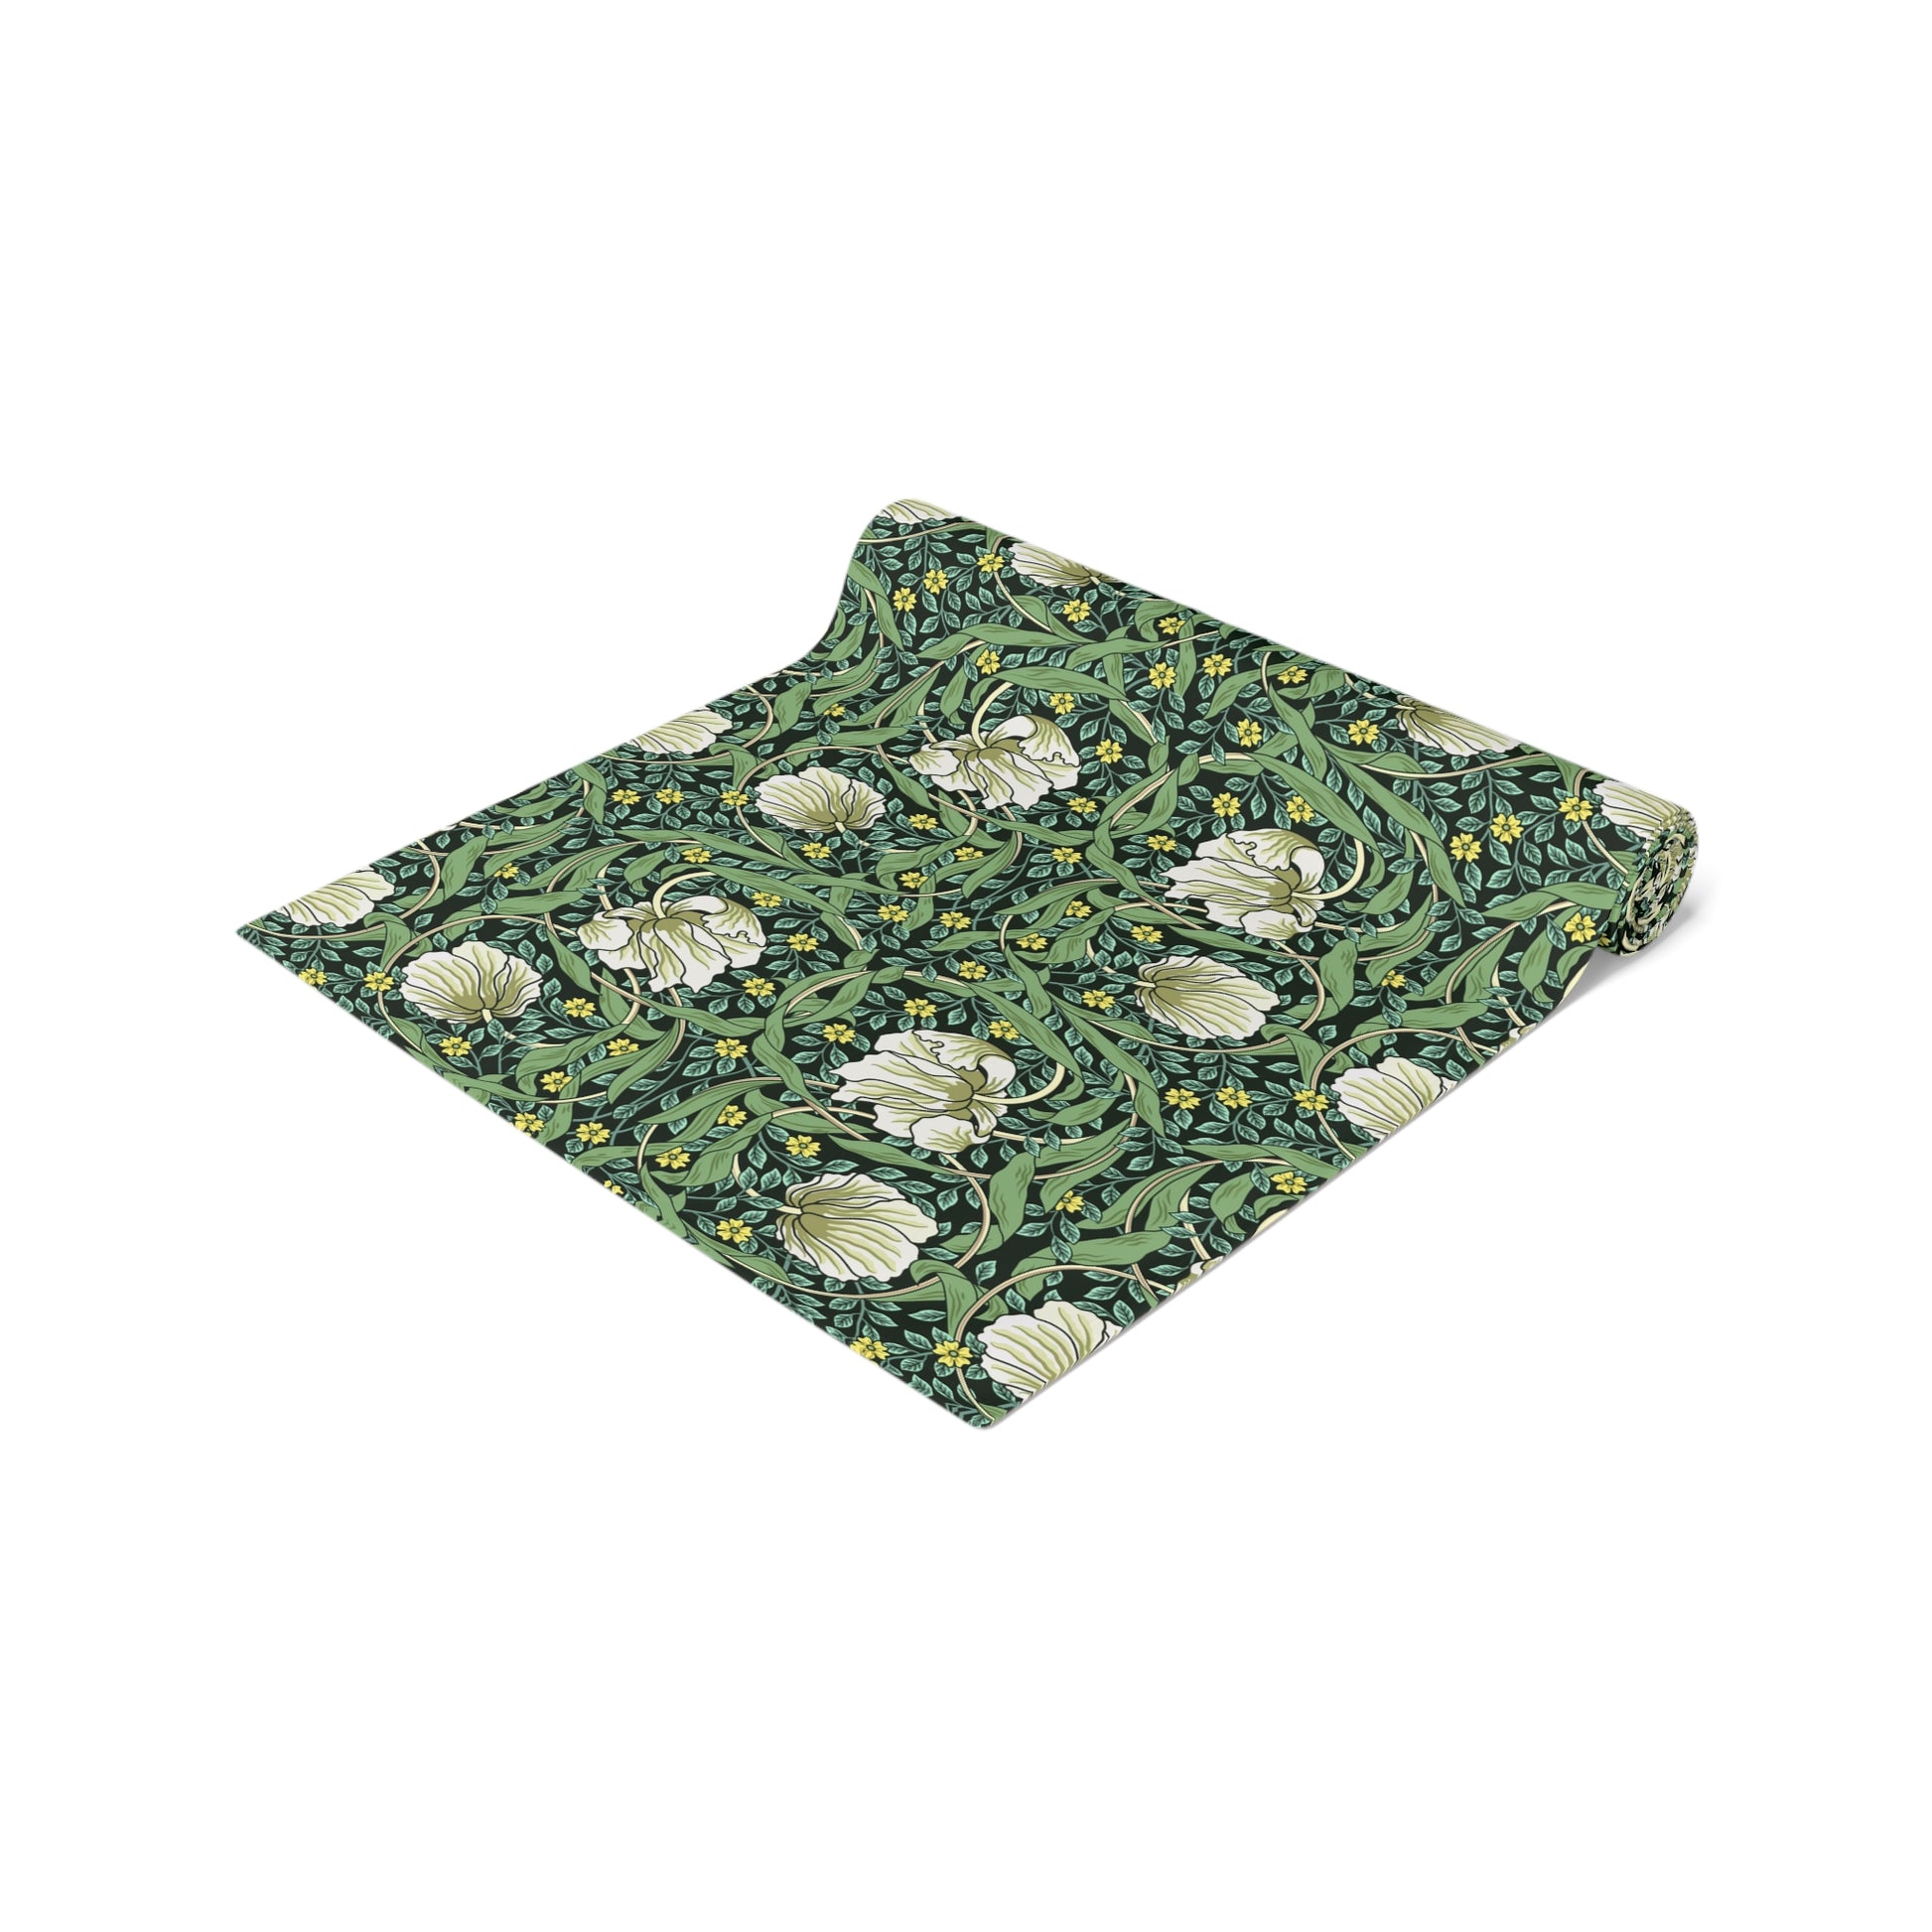 william-morris-co-table-runner-pimpernel-collection-green-19